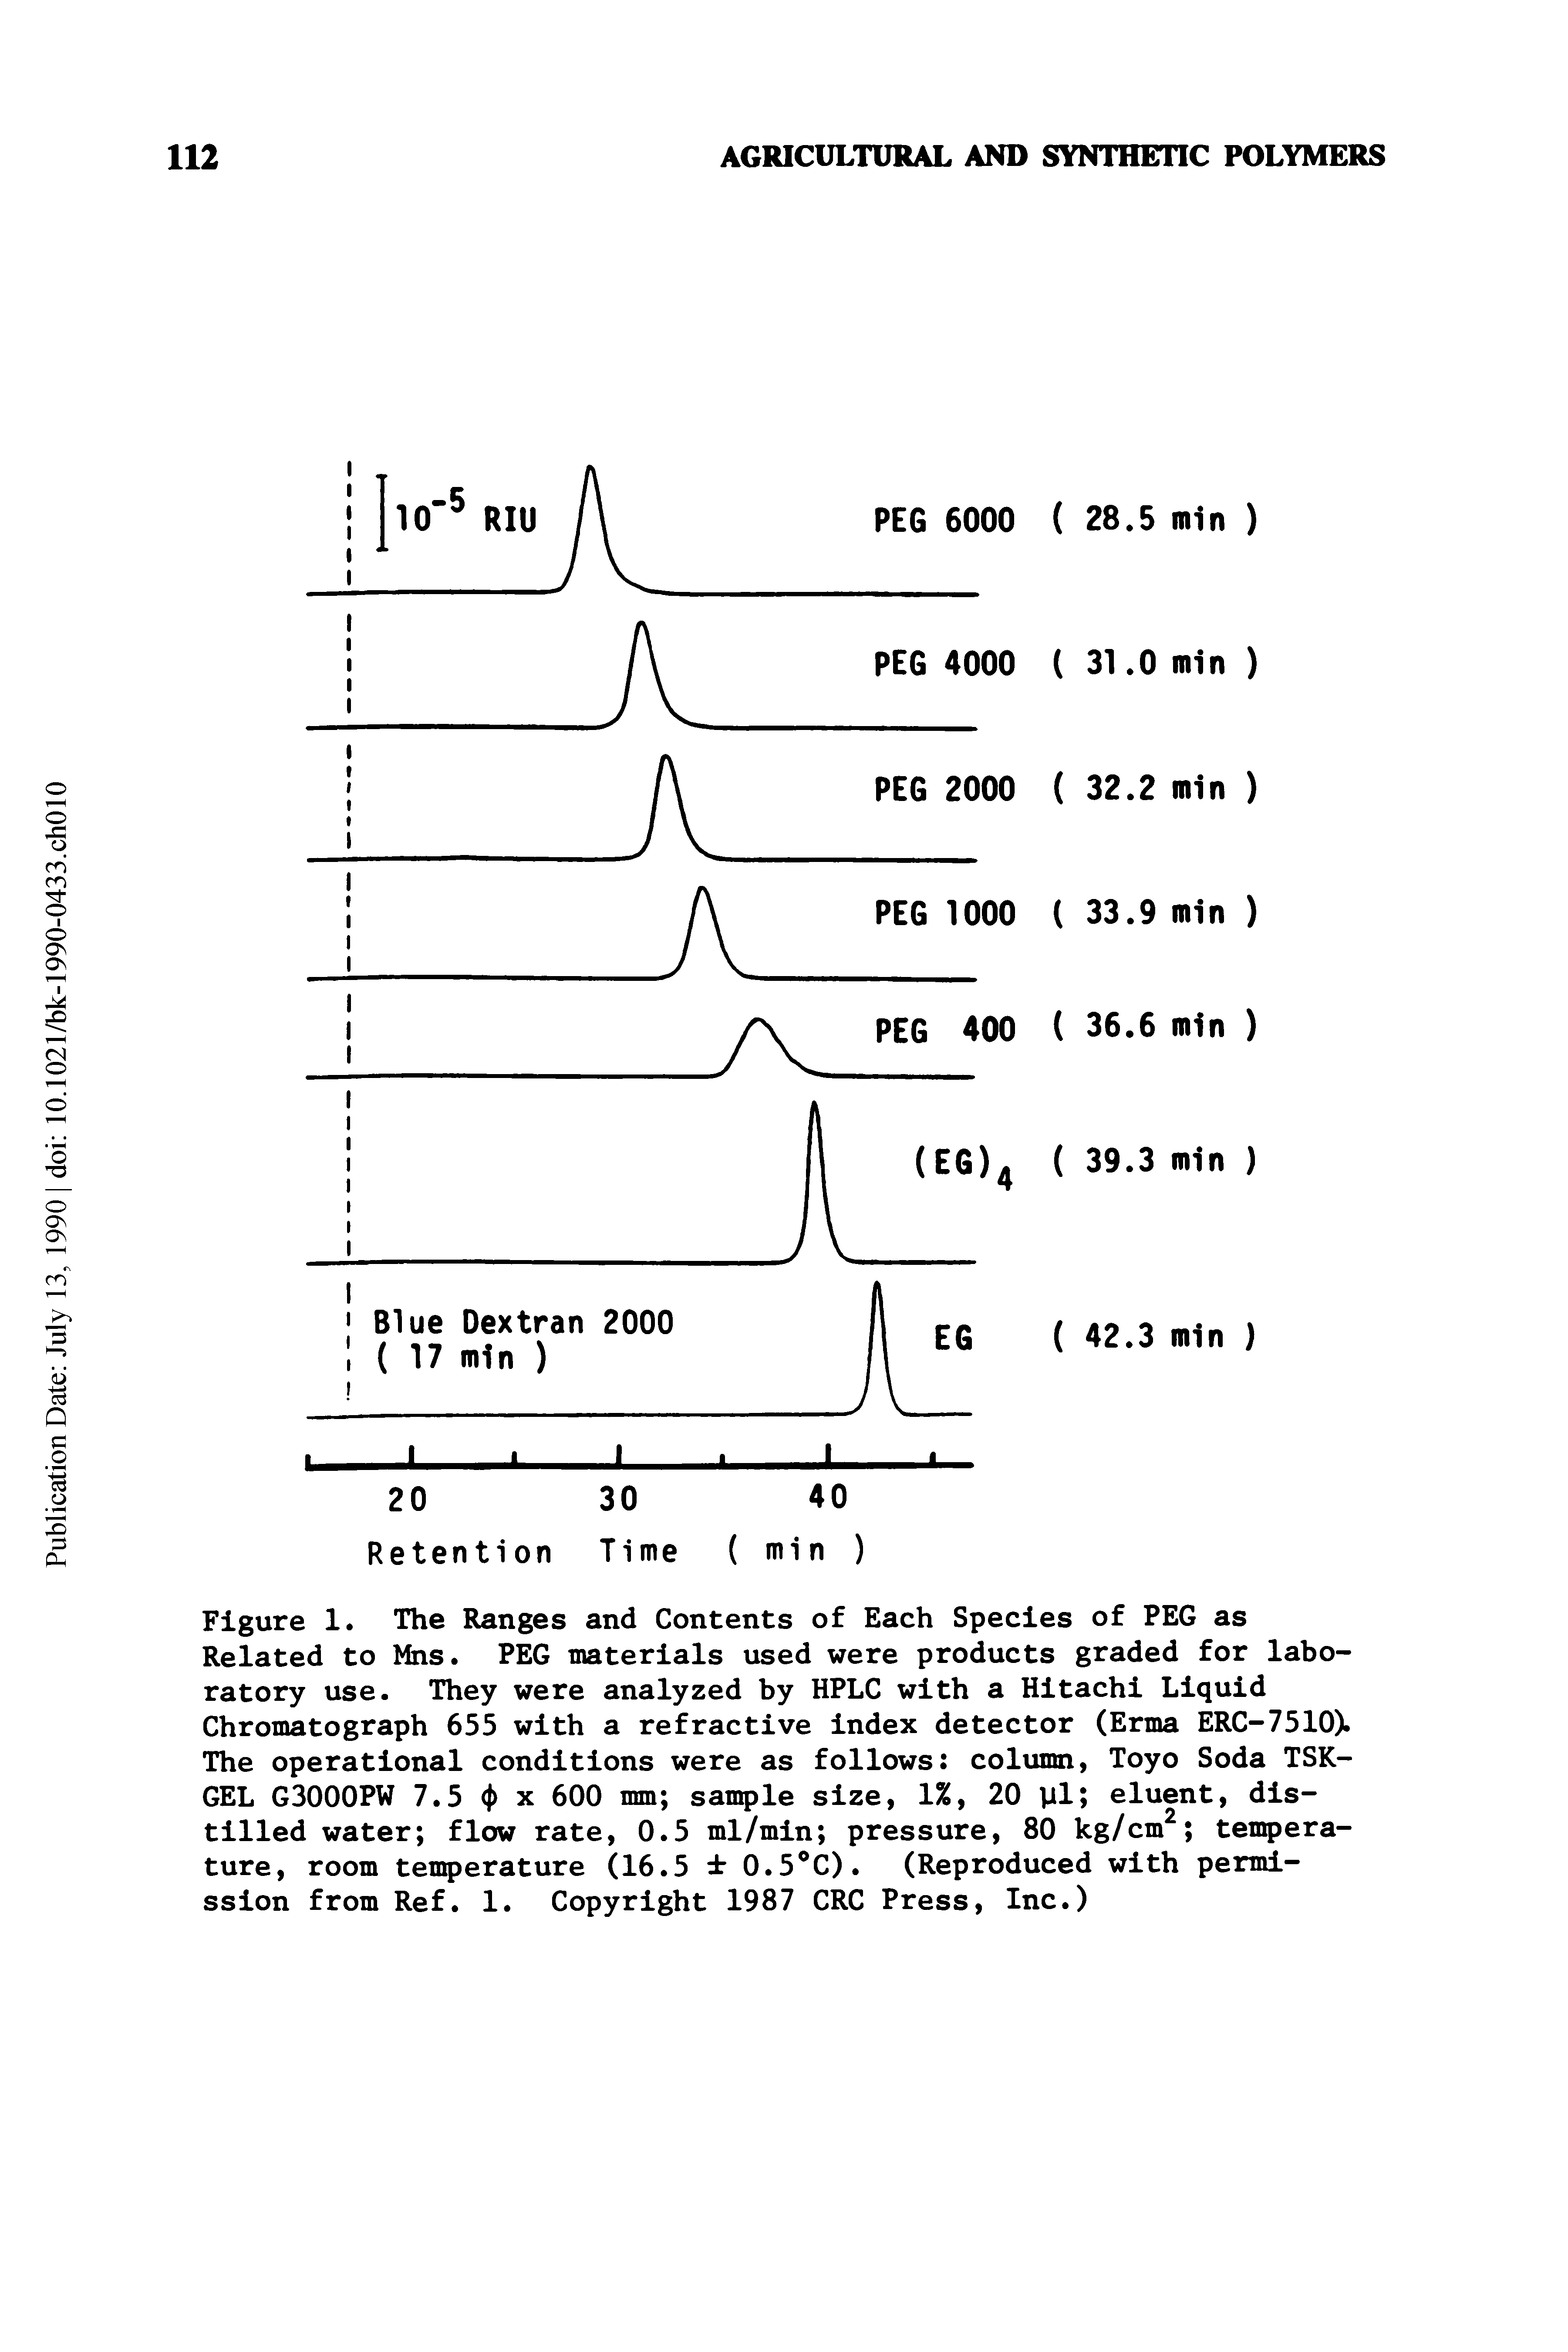 Figure 1. The Ranges and Contents of Each Species of PEG as Related to Mns. PEG materials used were products graded for laboratory use. They were analyzed by HPLC with a Hitachi Liquid Chromatograph 655 with a refractive index detector (Erma ERC-7510). The operational conditions were as follows column, Toyo Soda TSK-GEL G3000PW 7.5 x 600 mm sample size, 1%, 20 yl eluent, distilled water flow rate, 0.5 ml/min pressure, 80 kg/cm temperature, room temperature (16.5 0.5 C). (Reproduced with permission from Ref. 1. Copyright 1987 CRC Press, Inc.)...